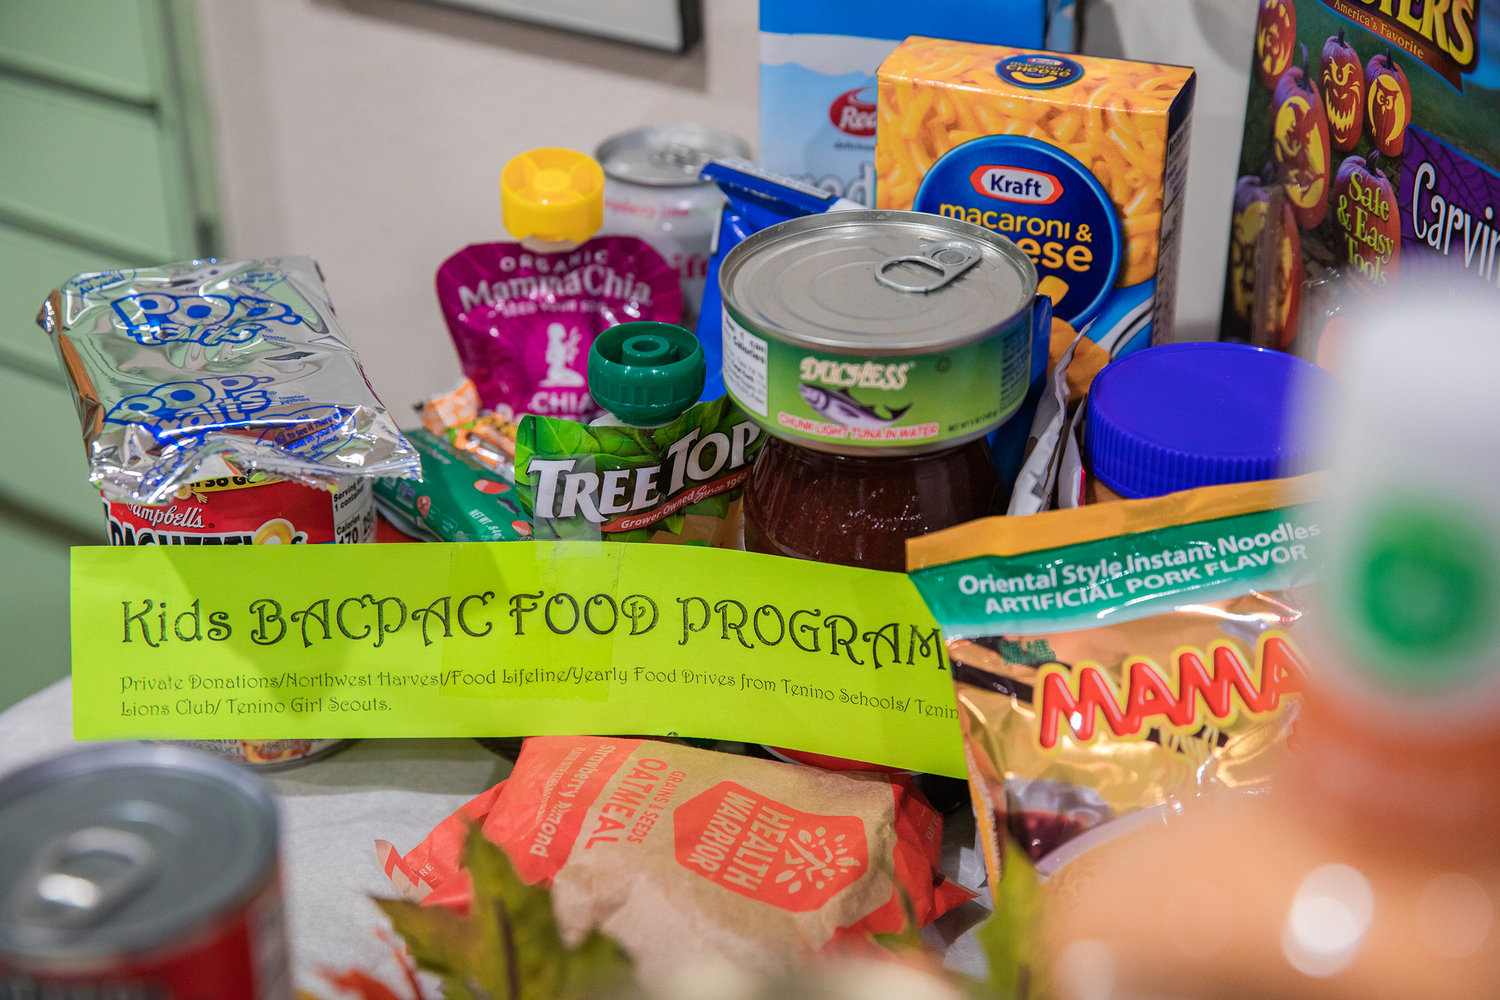 Meals are organized for the Kids BACPAC Food Program with donations from various organizations such as; Northwest Harvest, Food Lifeline, the Tenino Lions Club, the Tenino Girl Scouts and Tenino Schools Food Drives along with private donations.